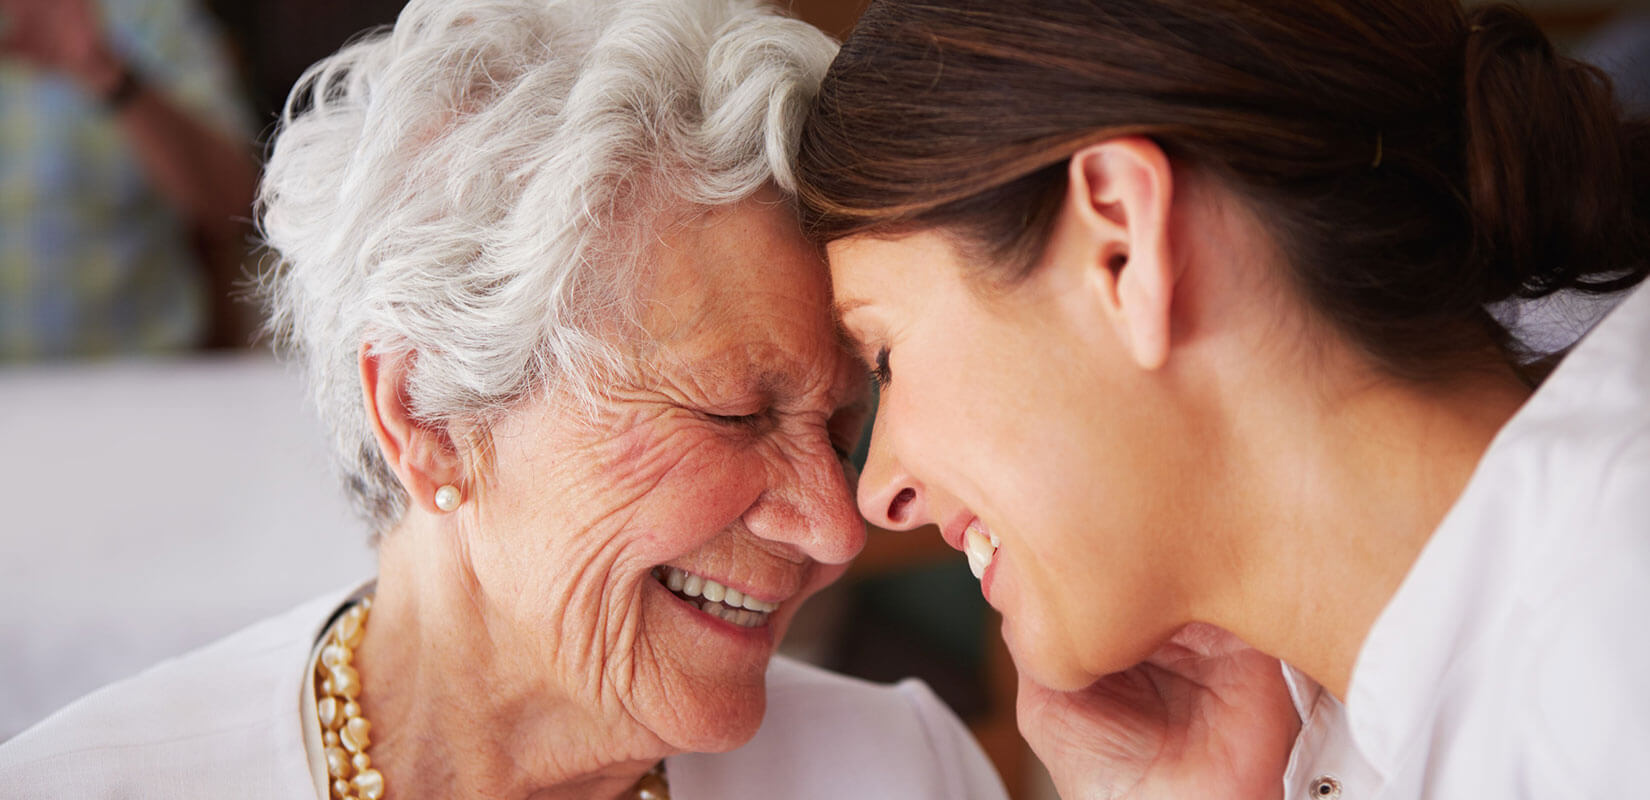 Elderly woman smiling with younger female caregiver. Foreheads touching affectionately.